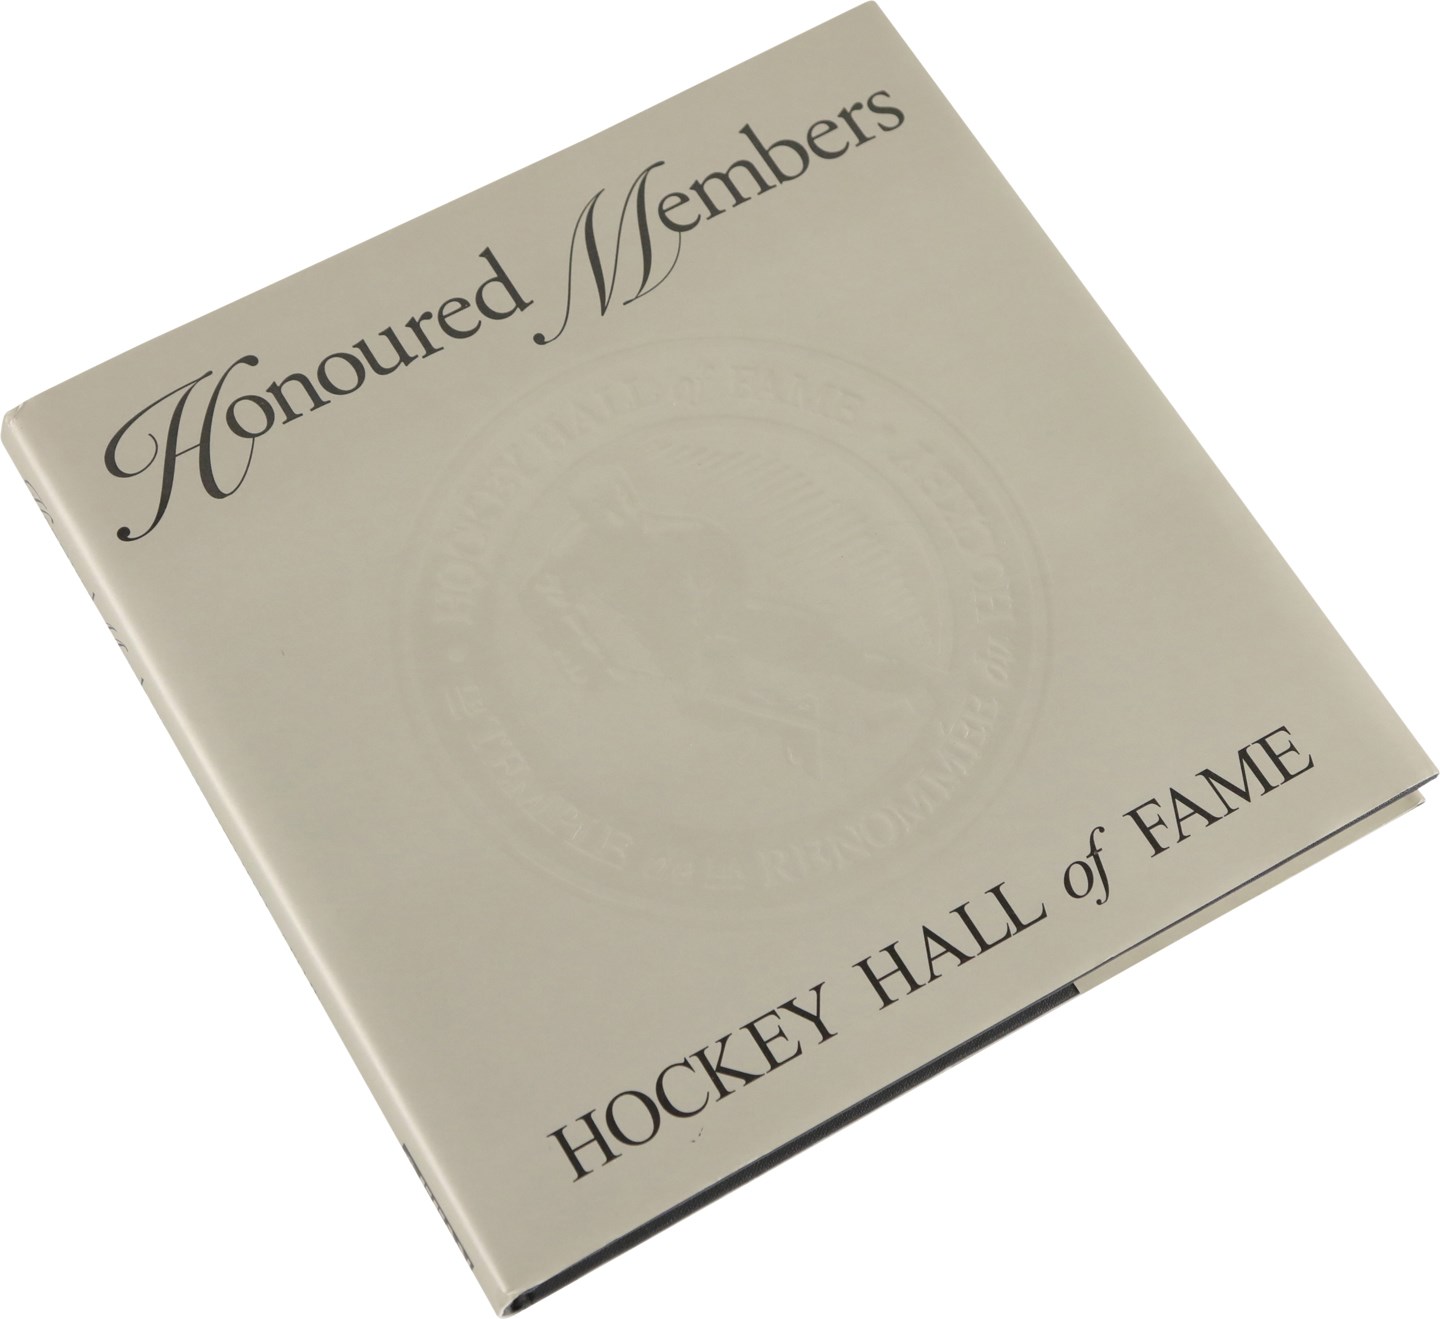 Hockey - Hockey Hall of Fame Book Signed by 19 Members Including Howe, Hull and Lemieux (JSA)